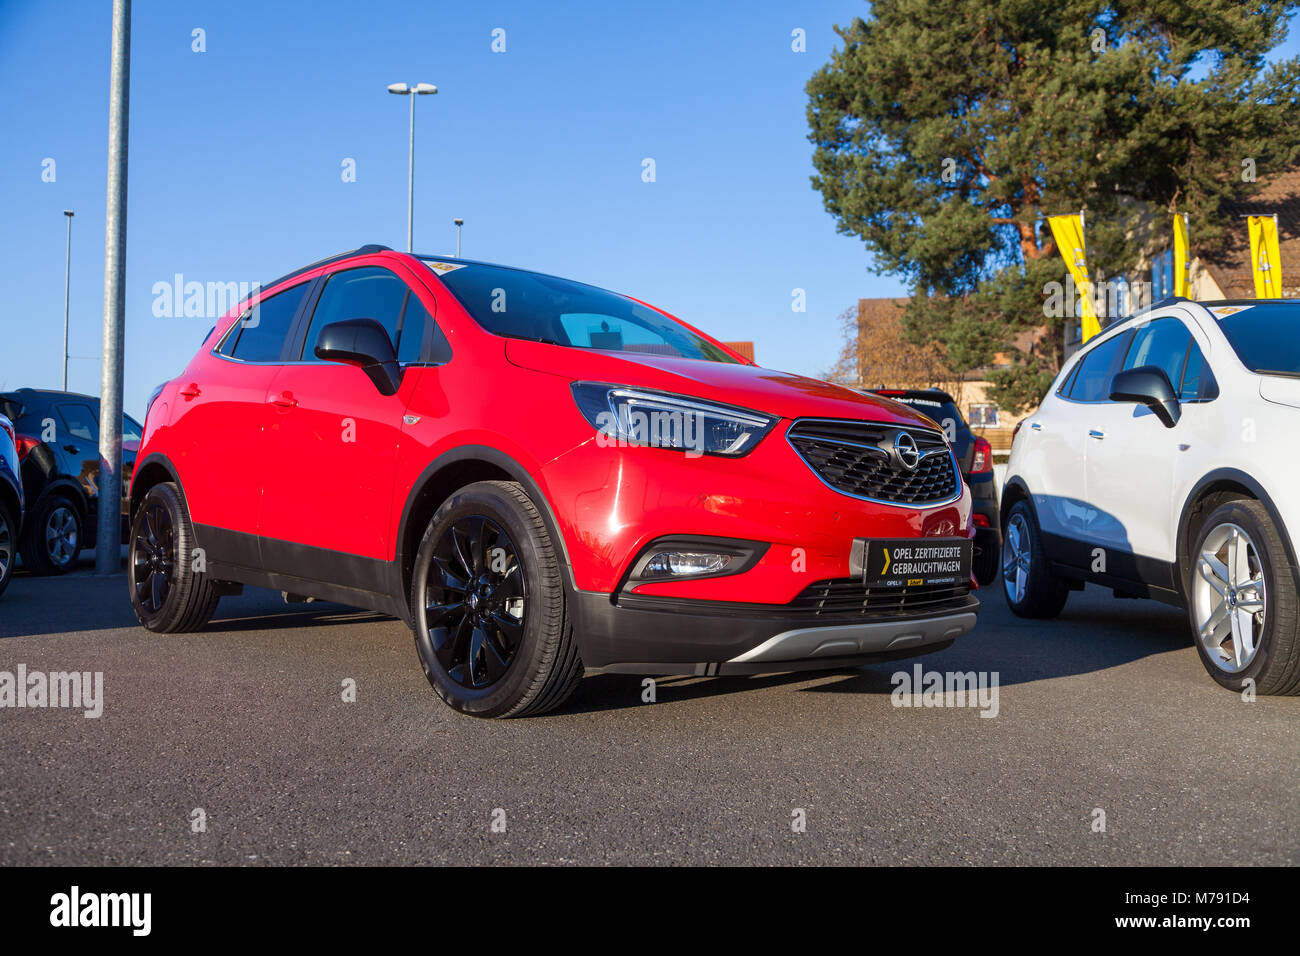 NUERNBERG / GERMANY - MARCH 4, 2018: Opel logo on a car at an Opel car dealer in Germany. Opel Automobile GmbH is a German automobile manufacturer. Stock Photo